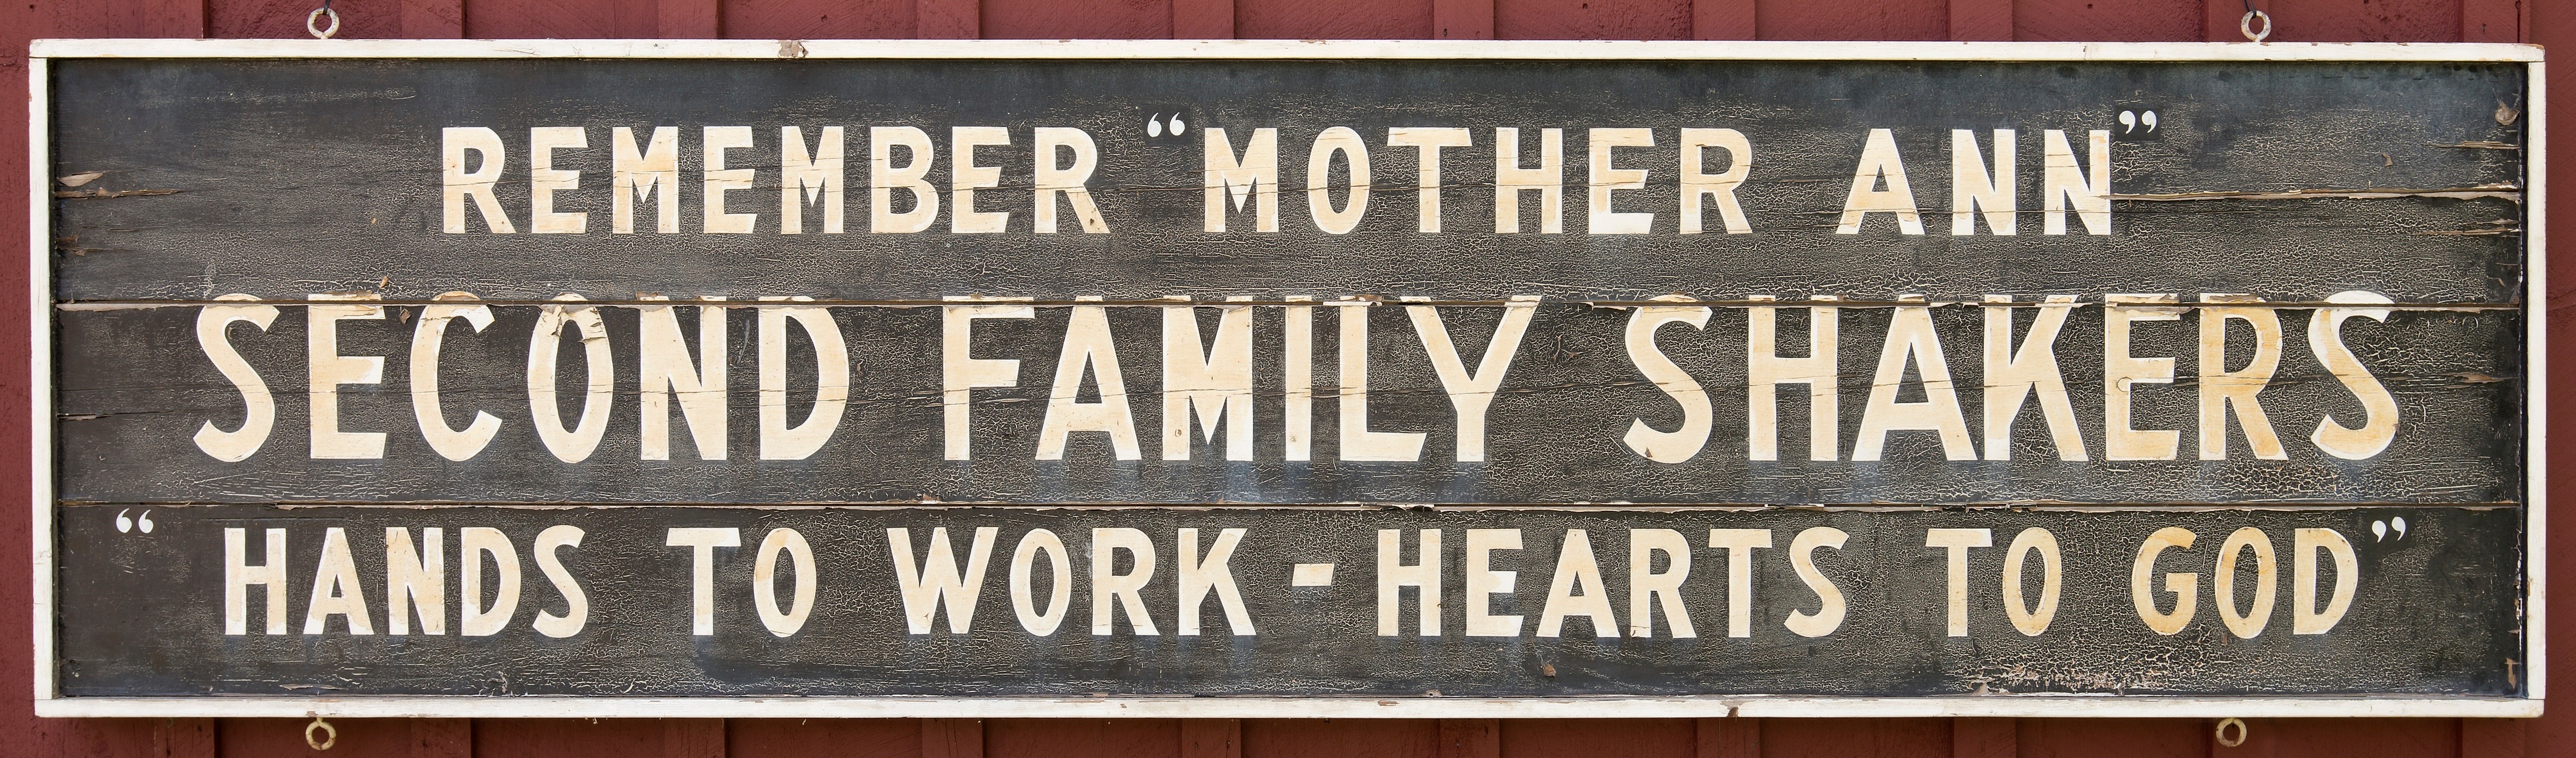 A sign that says remember mother an second family shaker hands work hearts to god.